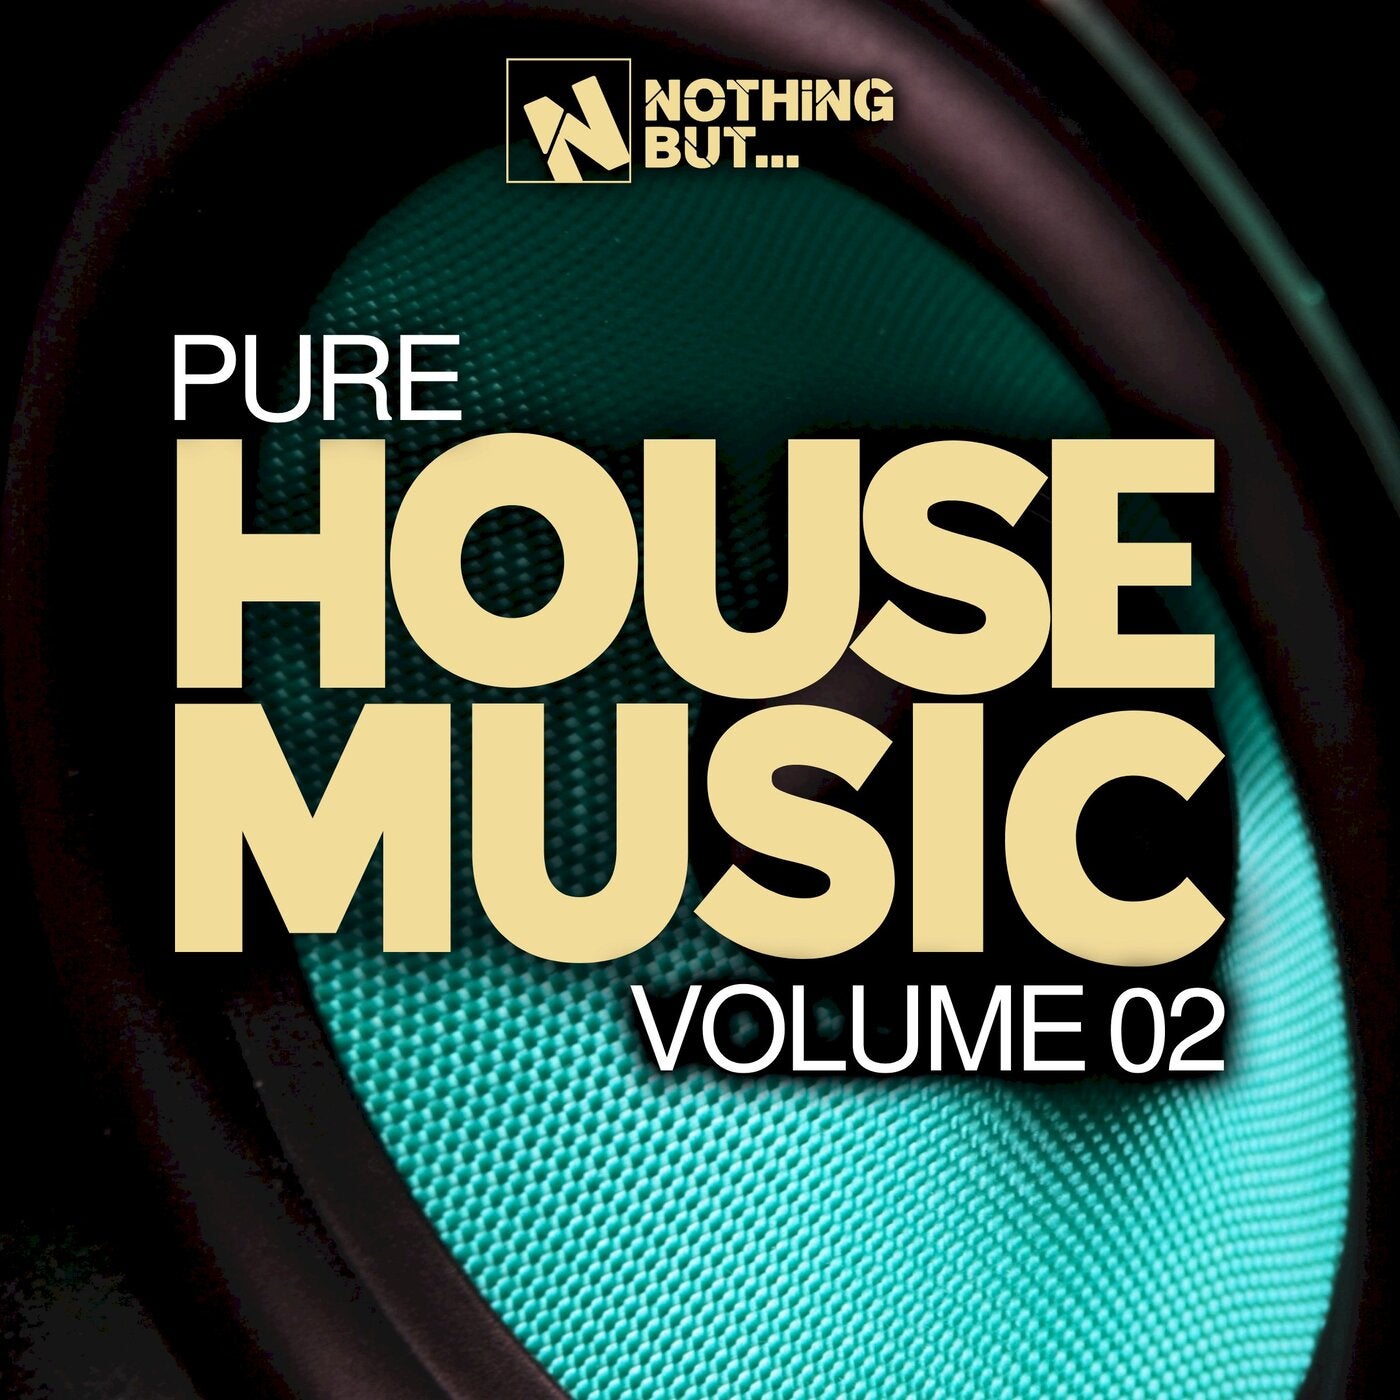 VA – Nothing But… Pure House Music, Vol. 02 [NBPHM02]